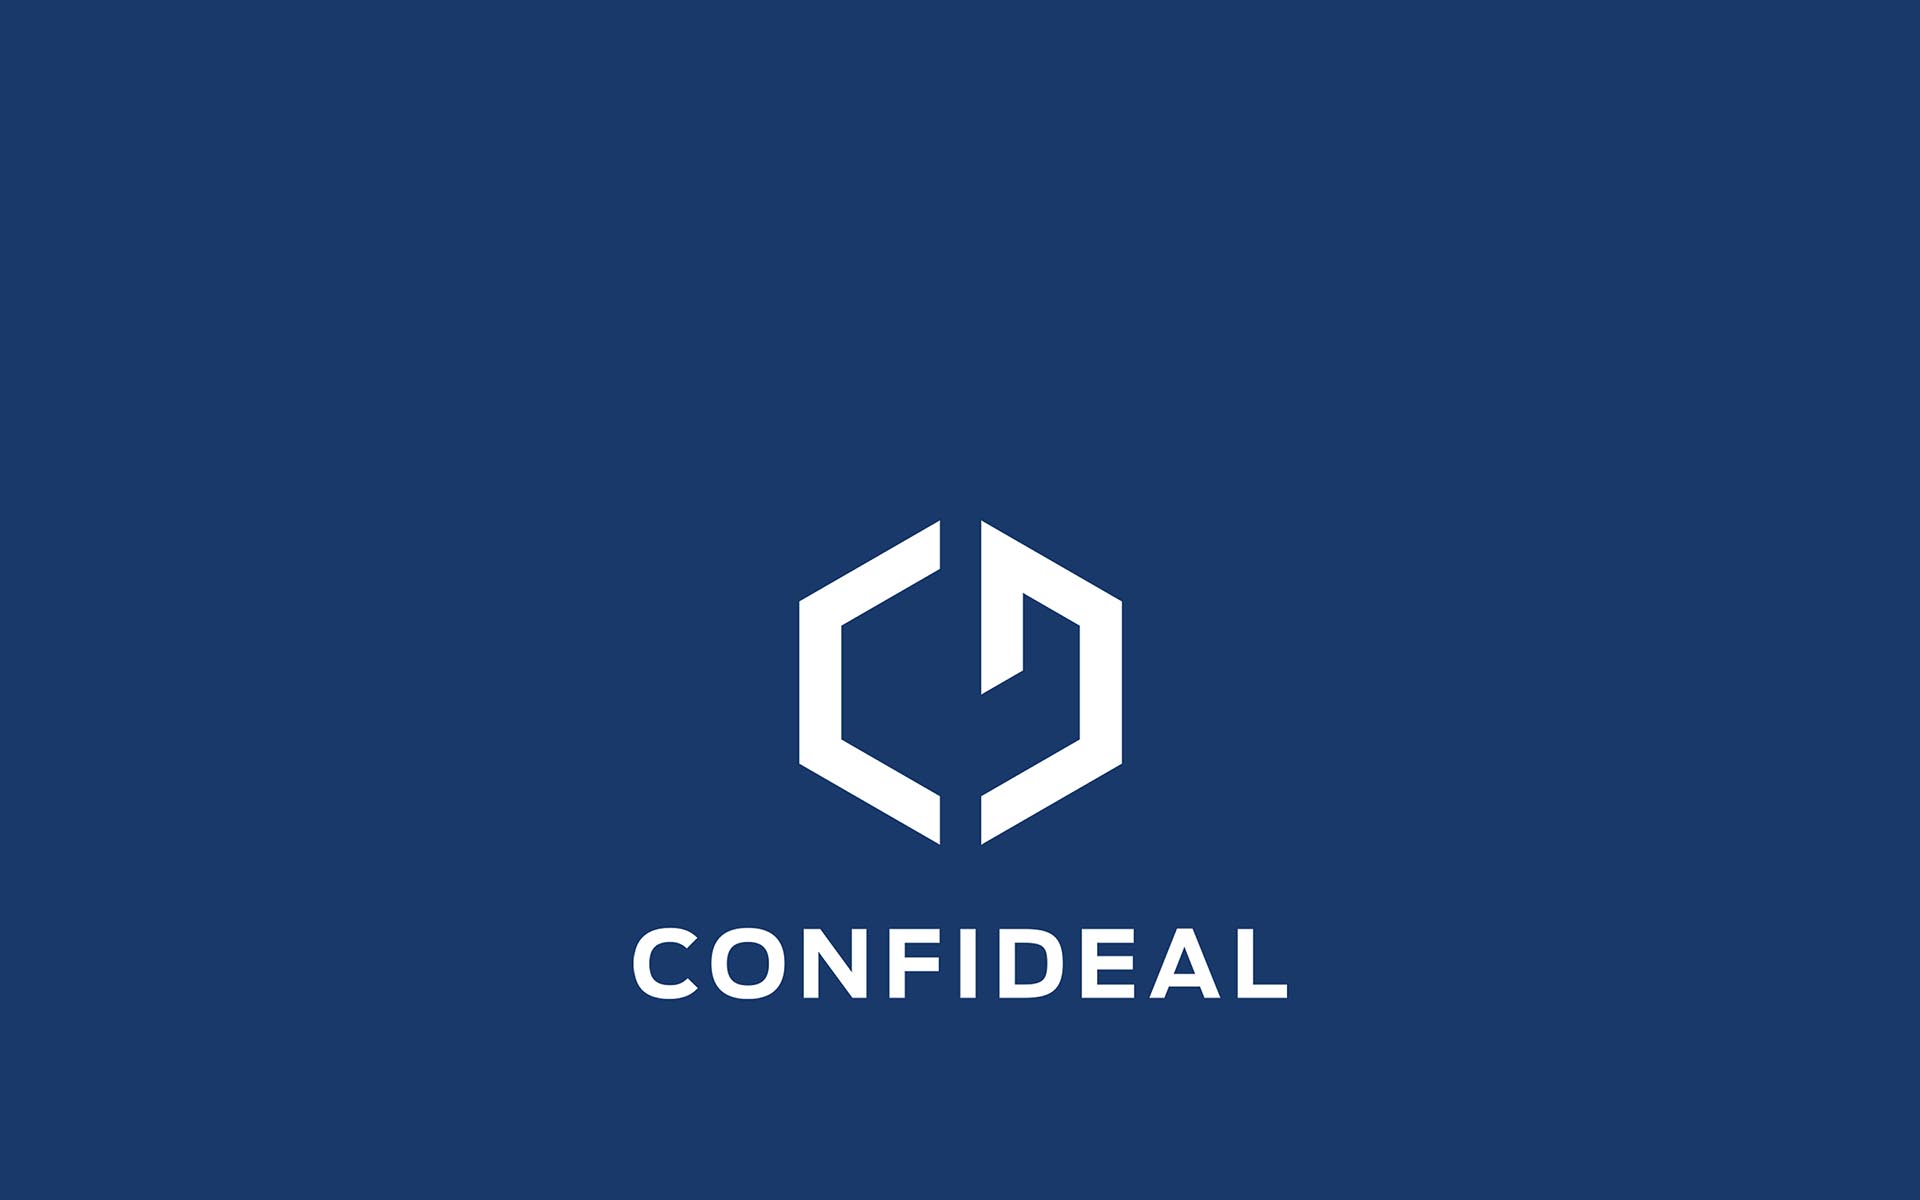 Confideal: MVP, 13 Cooperations with other Companies, 12 External Advisors, 5000 Subscribers-Contributors, Transparency Initiative. 2nd November - ICO Start. Time to Contribute to Success!